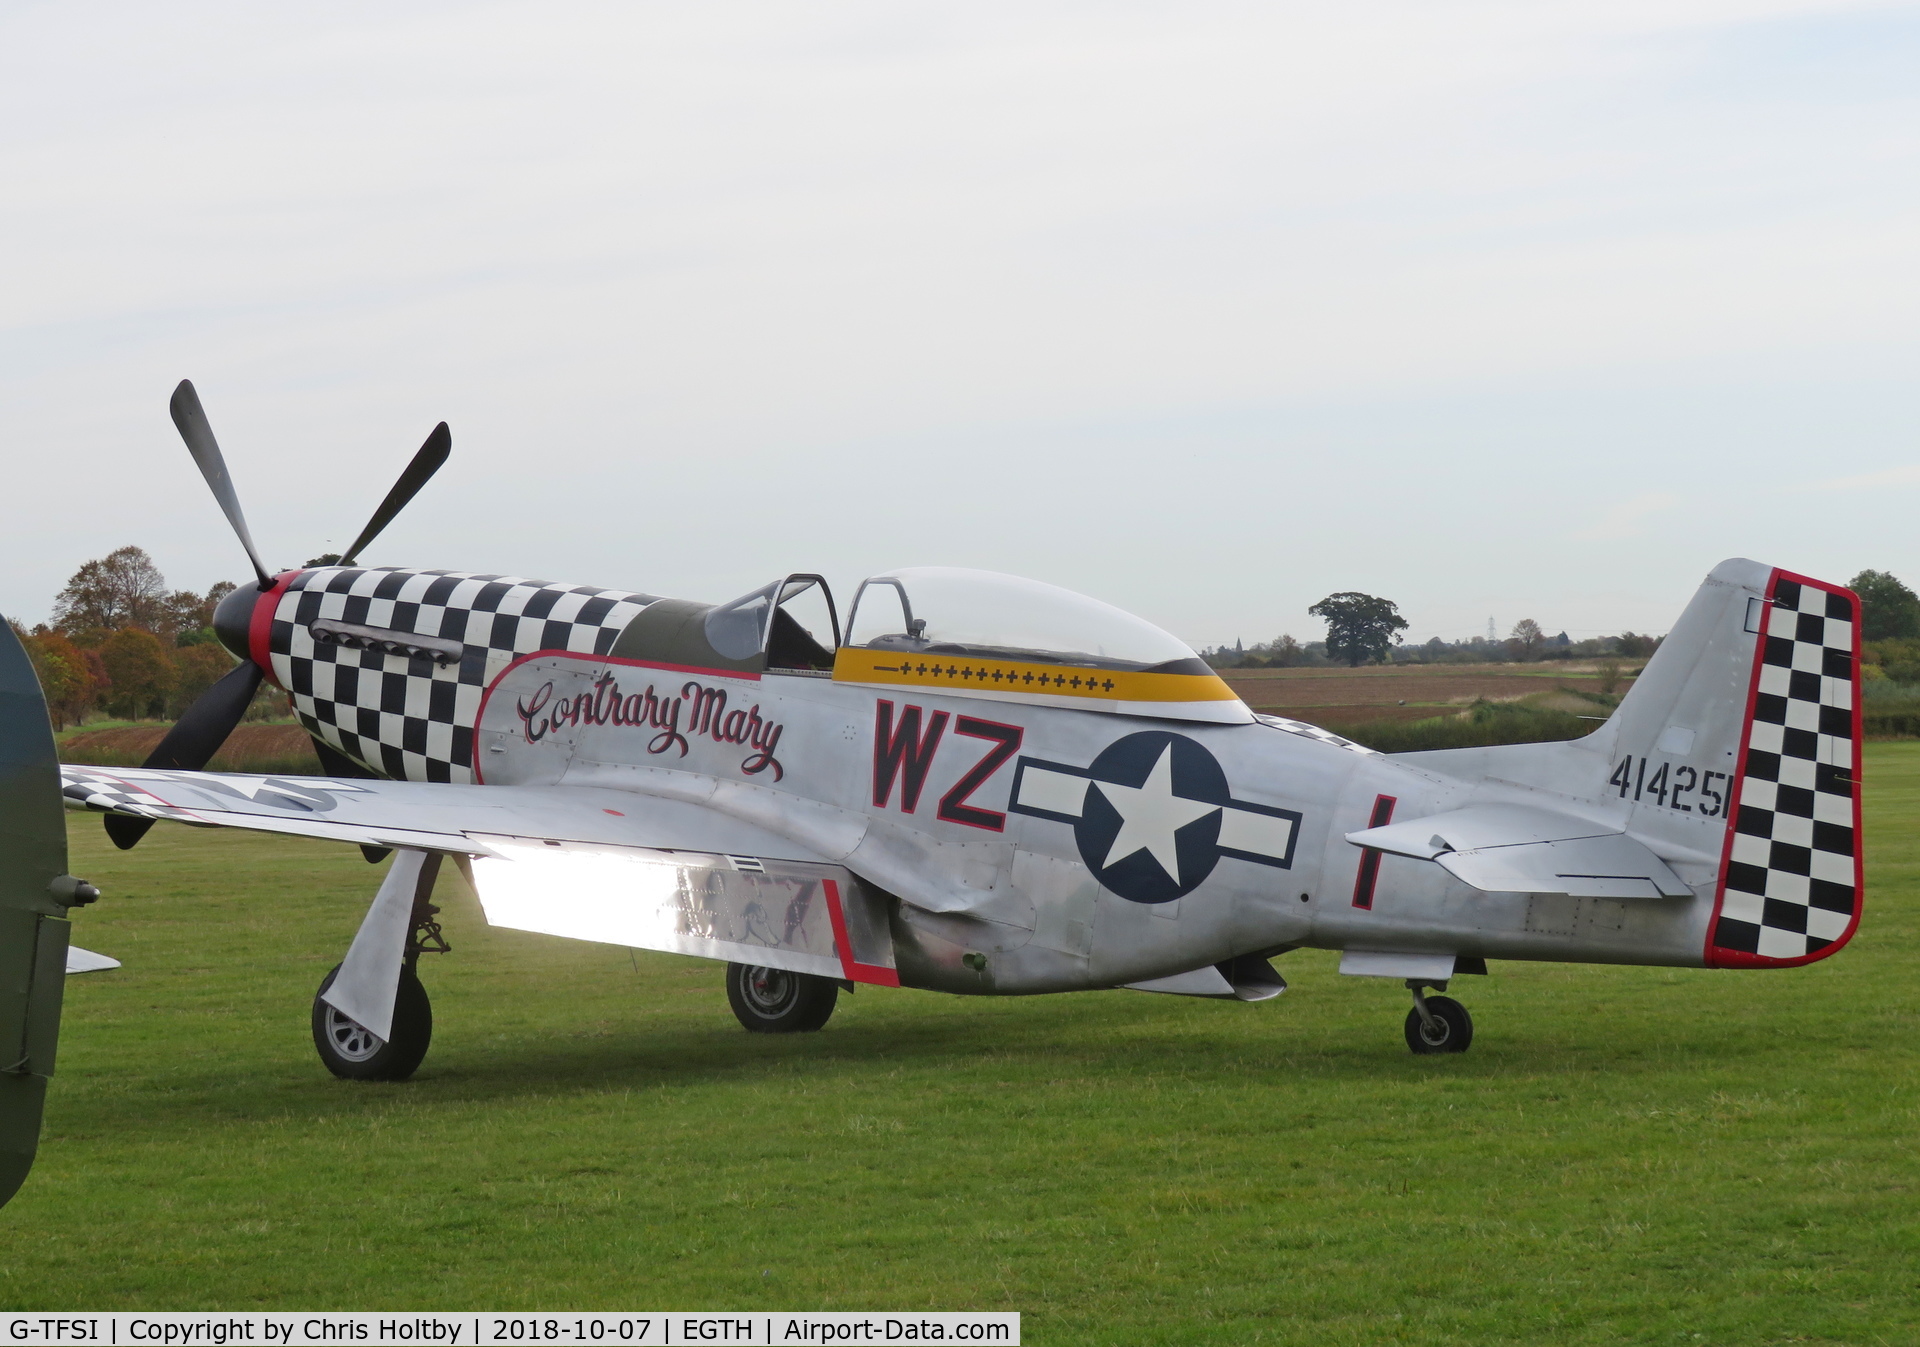 G-TFSI, 1944 North American TF-51D Mustang C/N 124-44703, Flew with Hurricane as part of the Shuttleworth Race Day 2018 at Old Warden